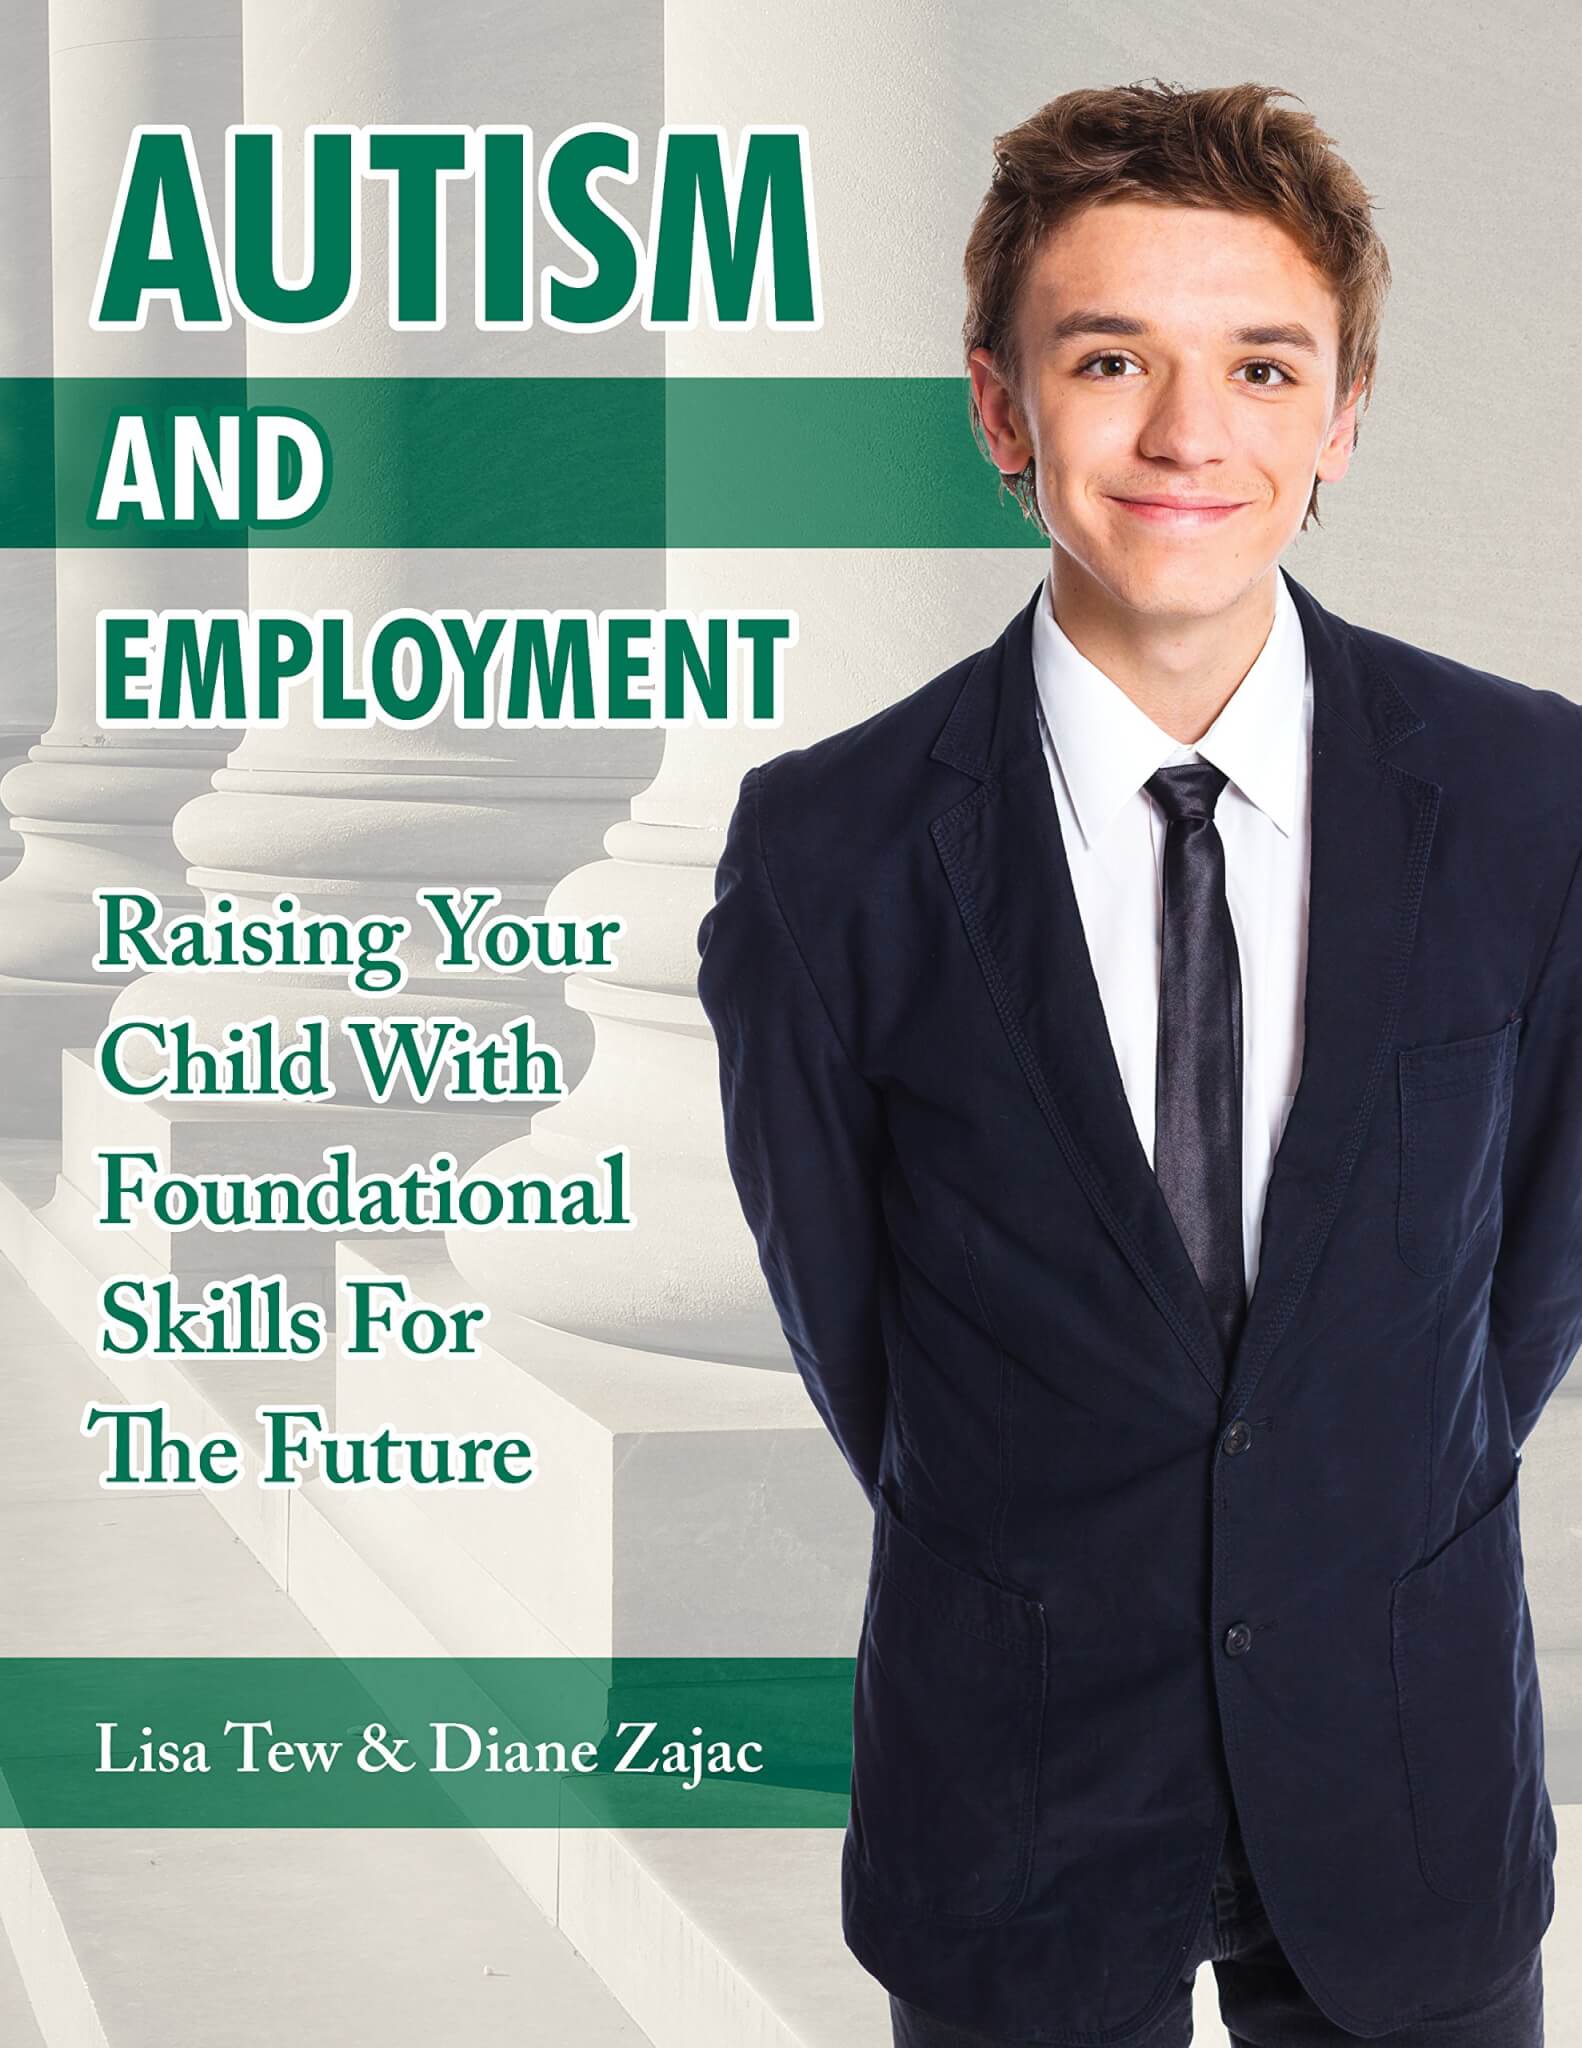 Autism and Employment: Raising Your Child with Foundational Skills for The Future